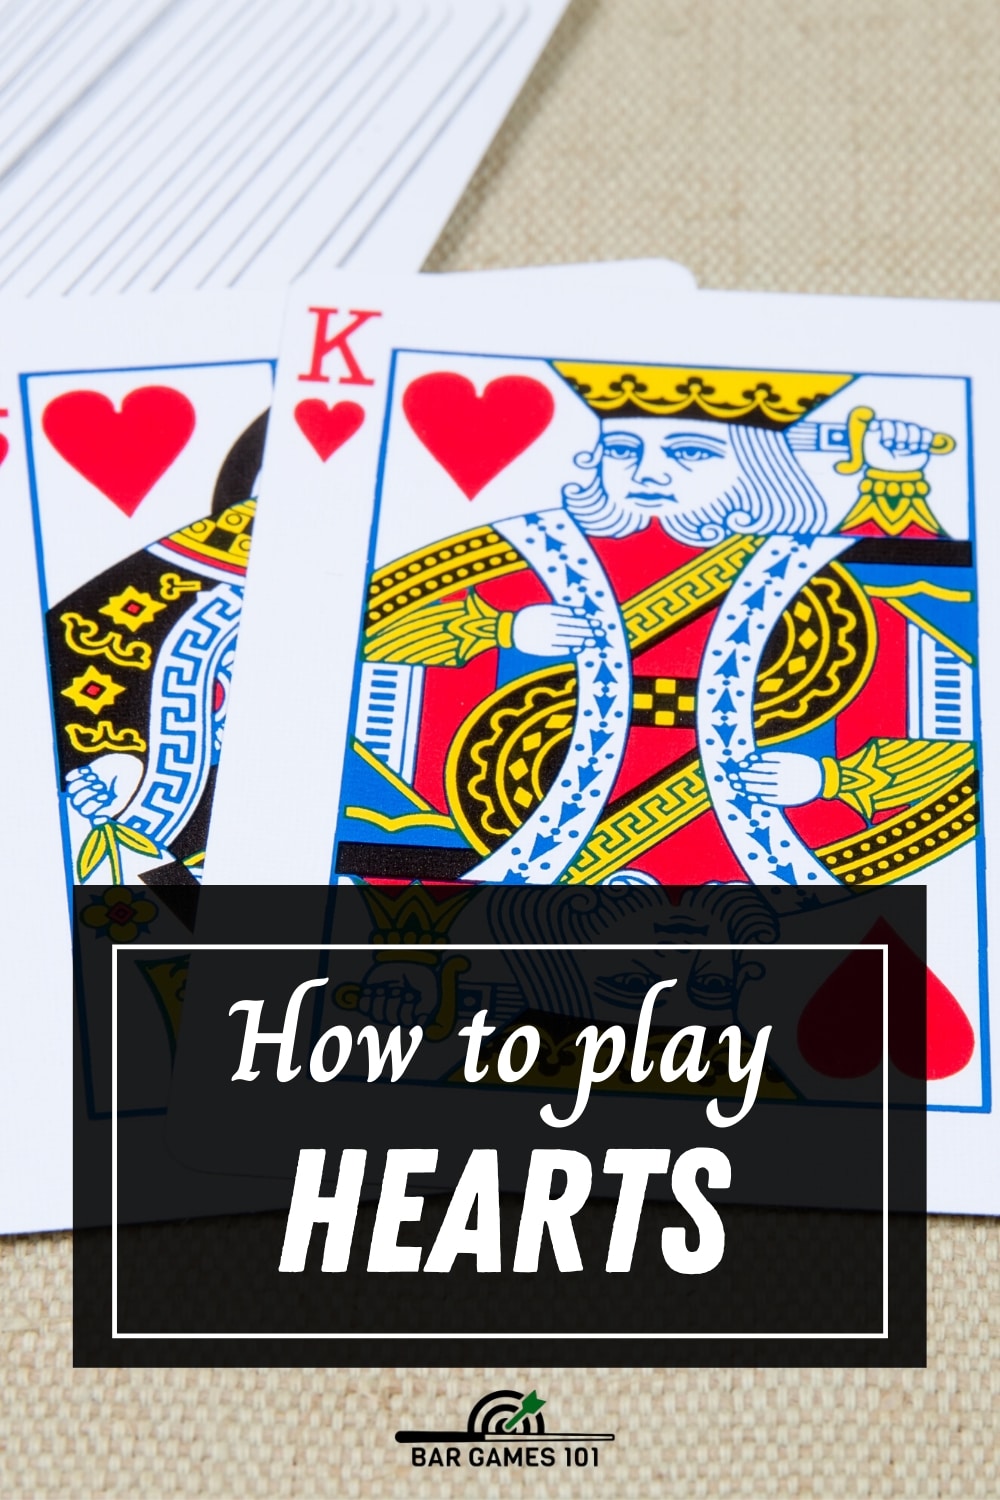 3 person hearts card game rules